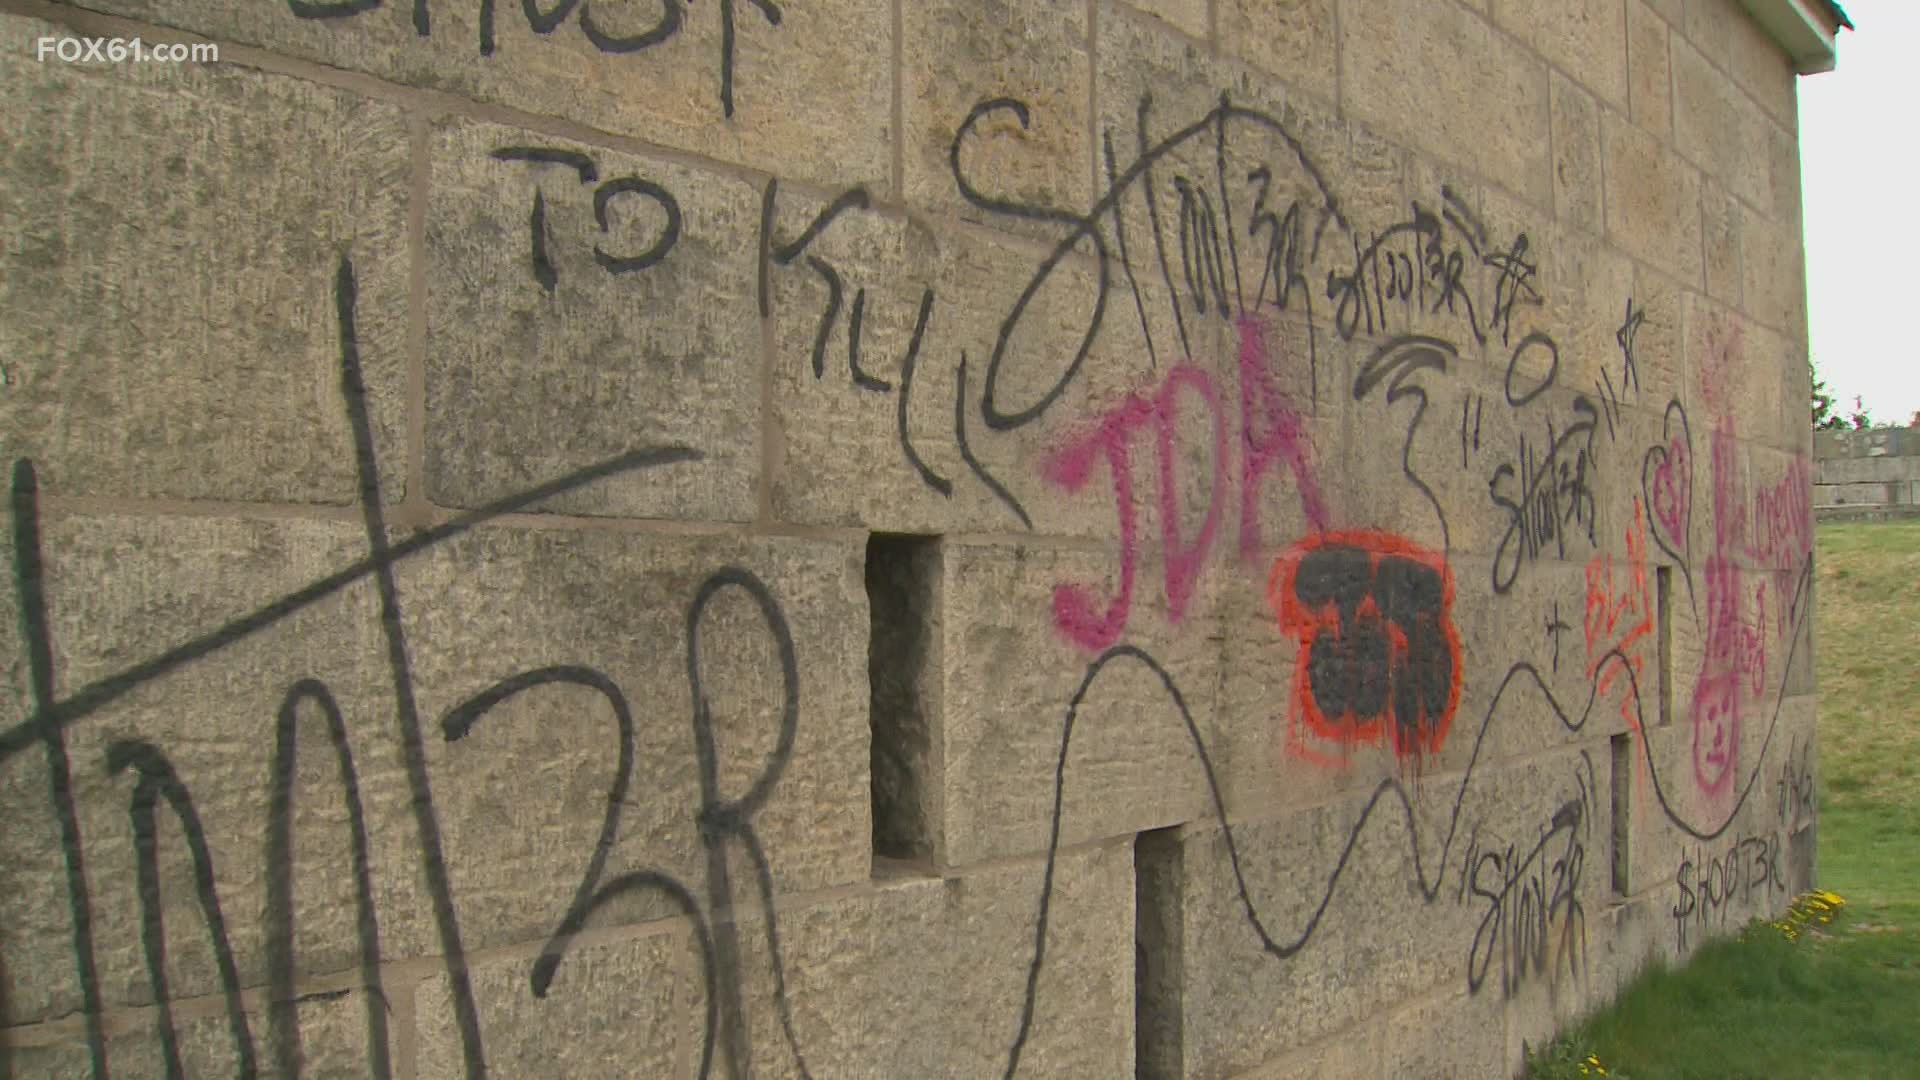 Local residents are outraged by the vandalism on the historic site. However, groups are planning to clean it up.